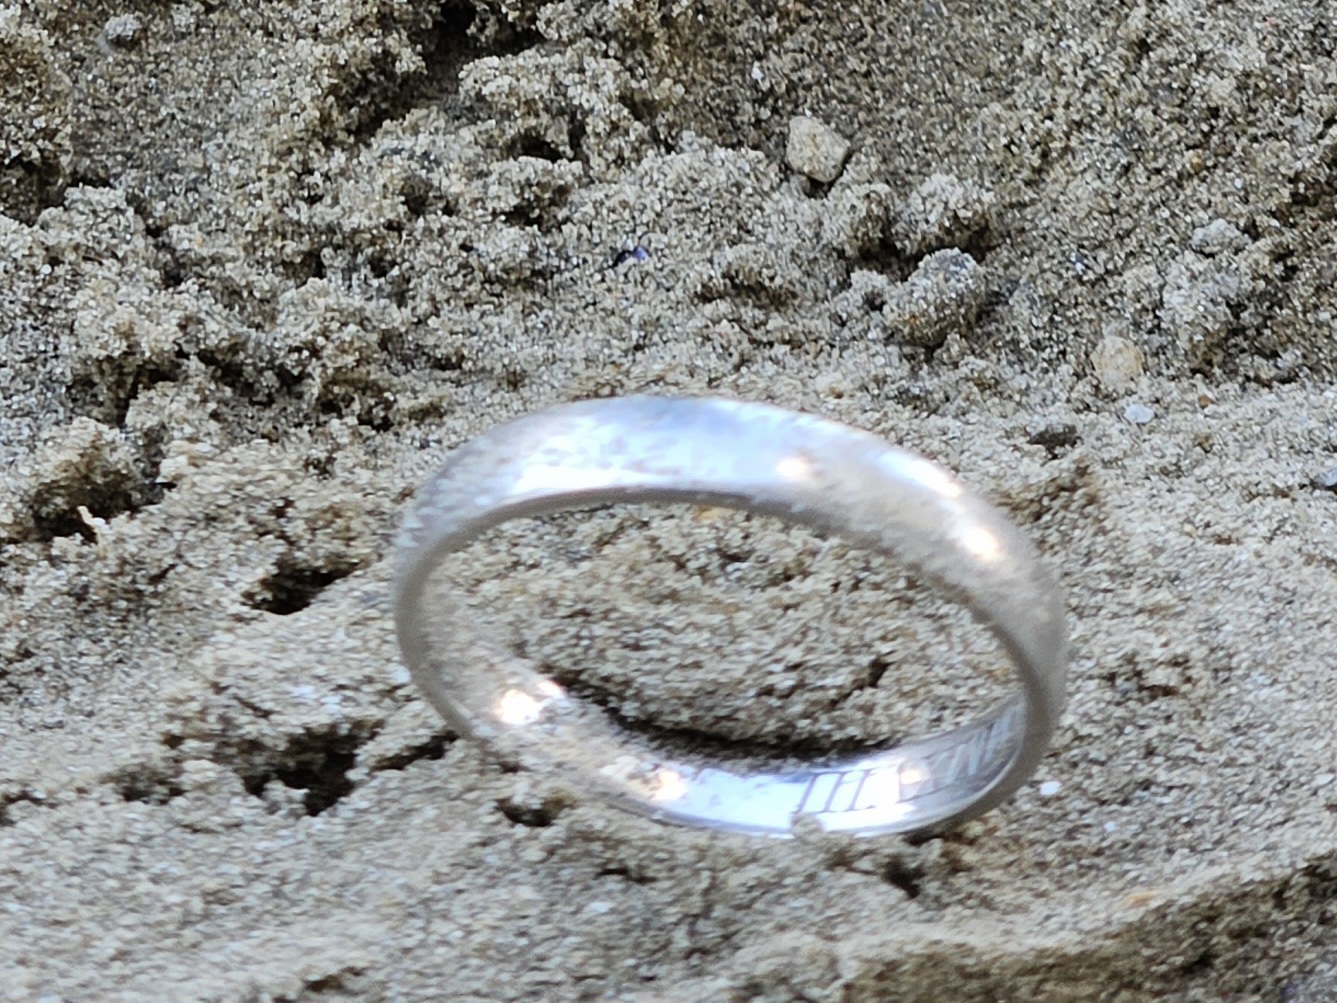 How to find a lost ring in the sand